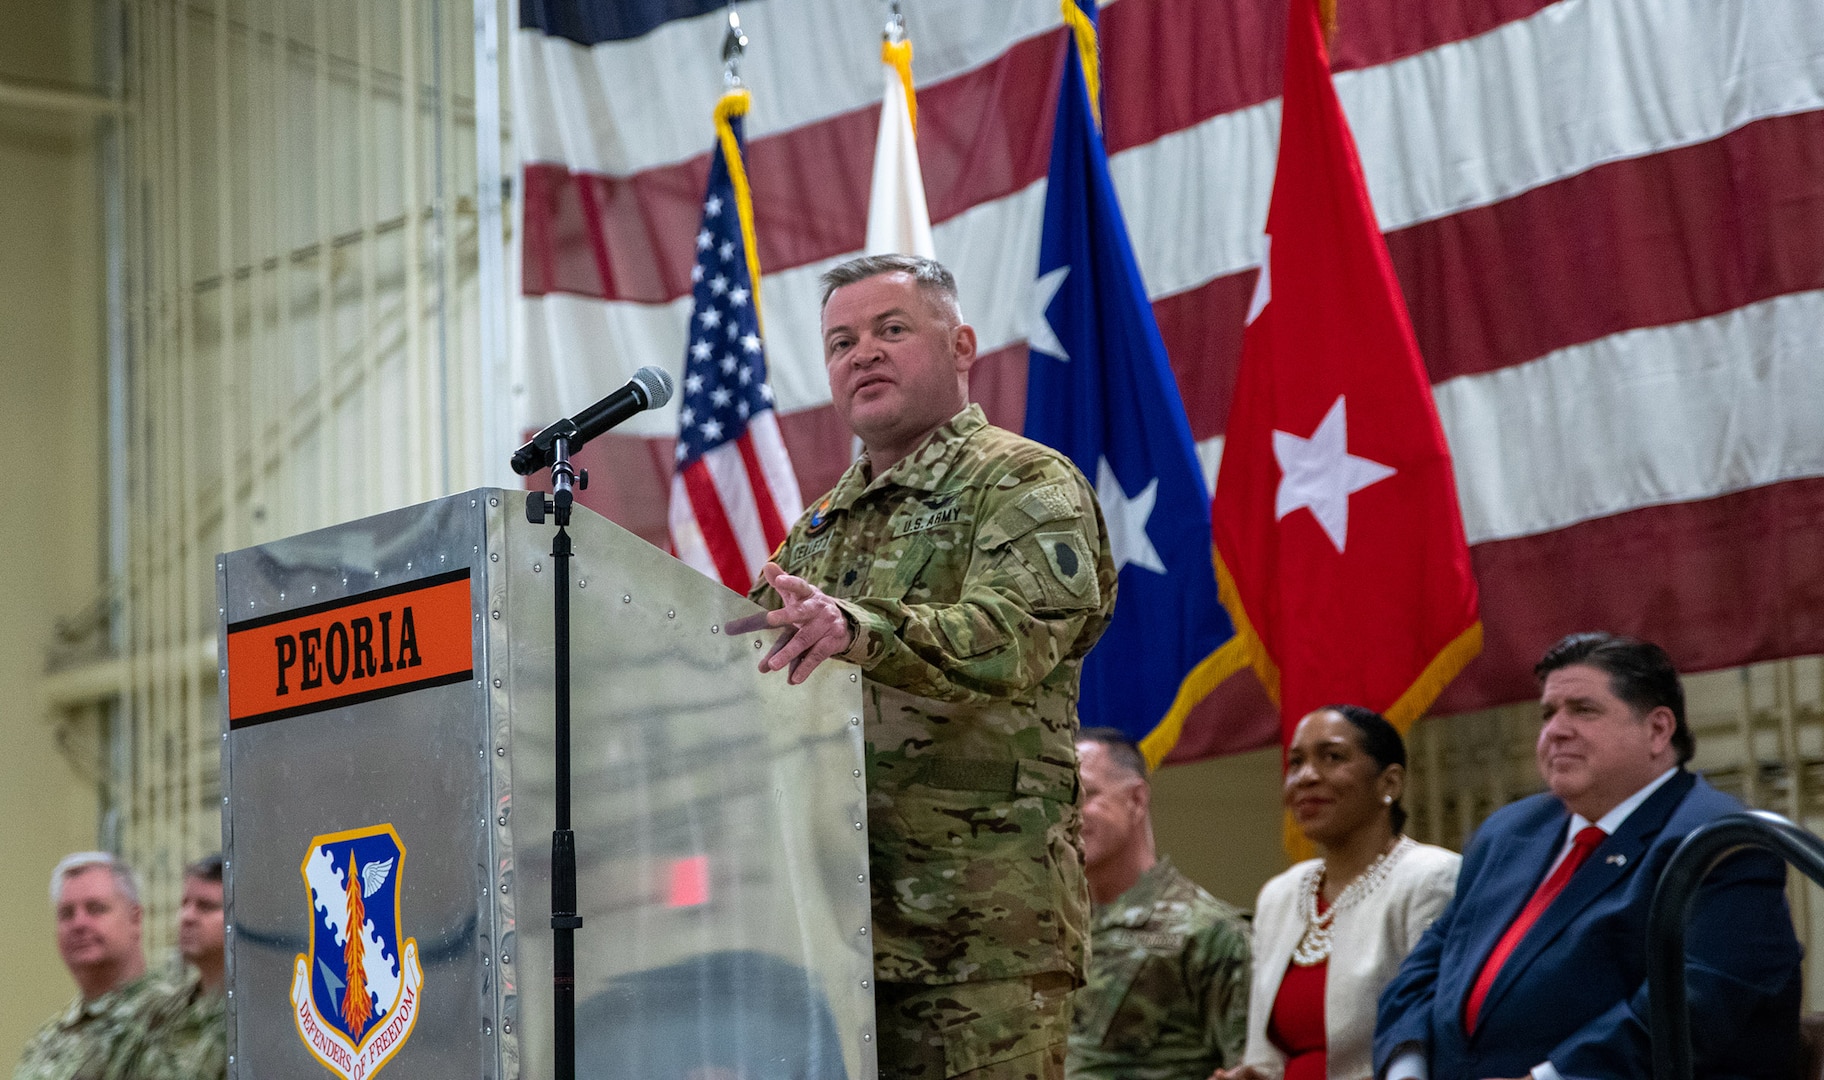 Lt. Col. Jason Celletti, commander, 1st Assault Helicopter Battalion, 106th Aviation Regiment, thanks friends and families for their support during the mobilization ceremony Feb. 7 at the 182nd Airlift Wing, Peoria.